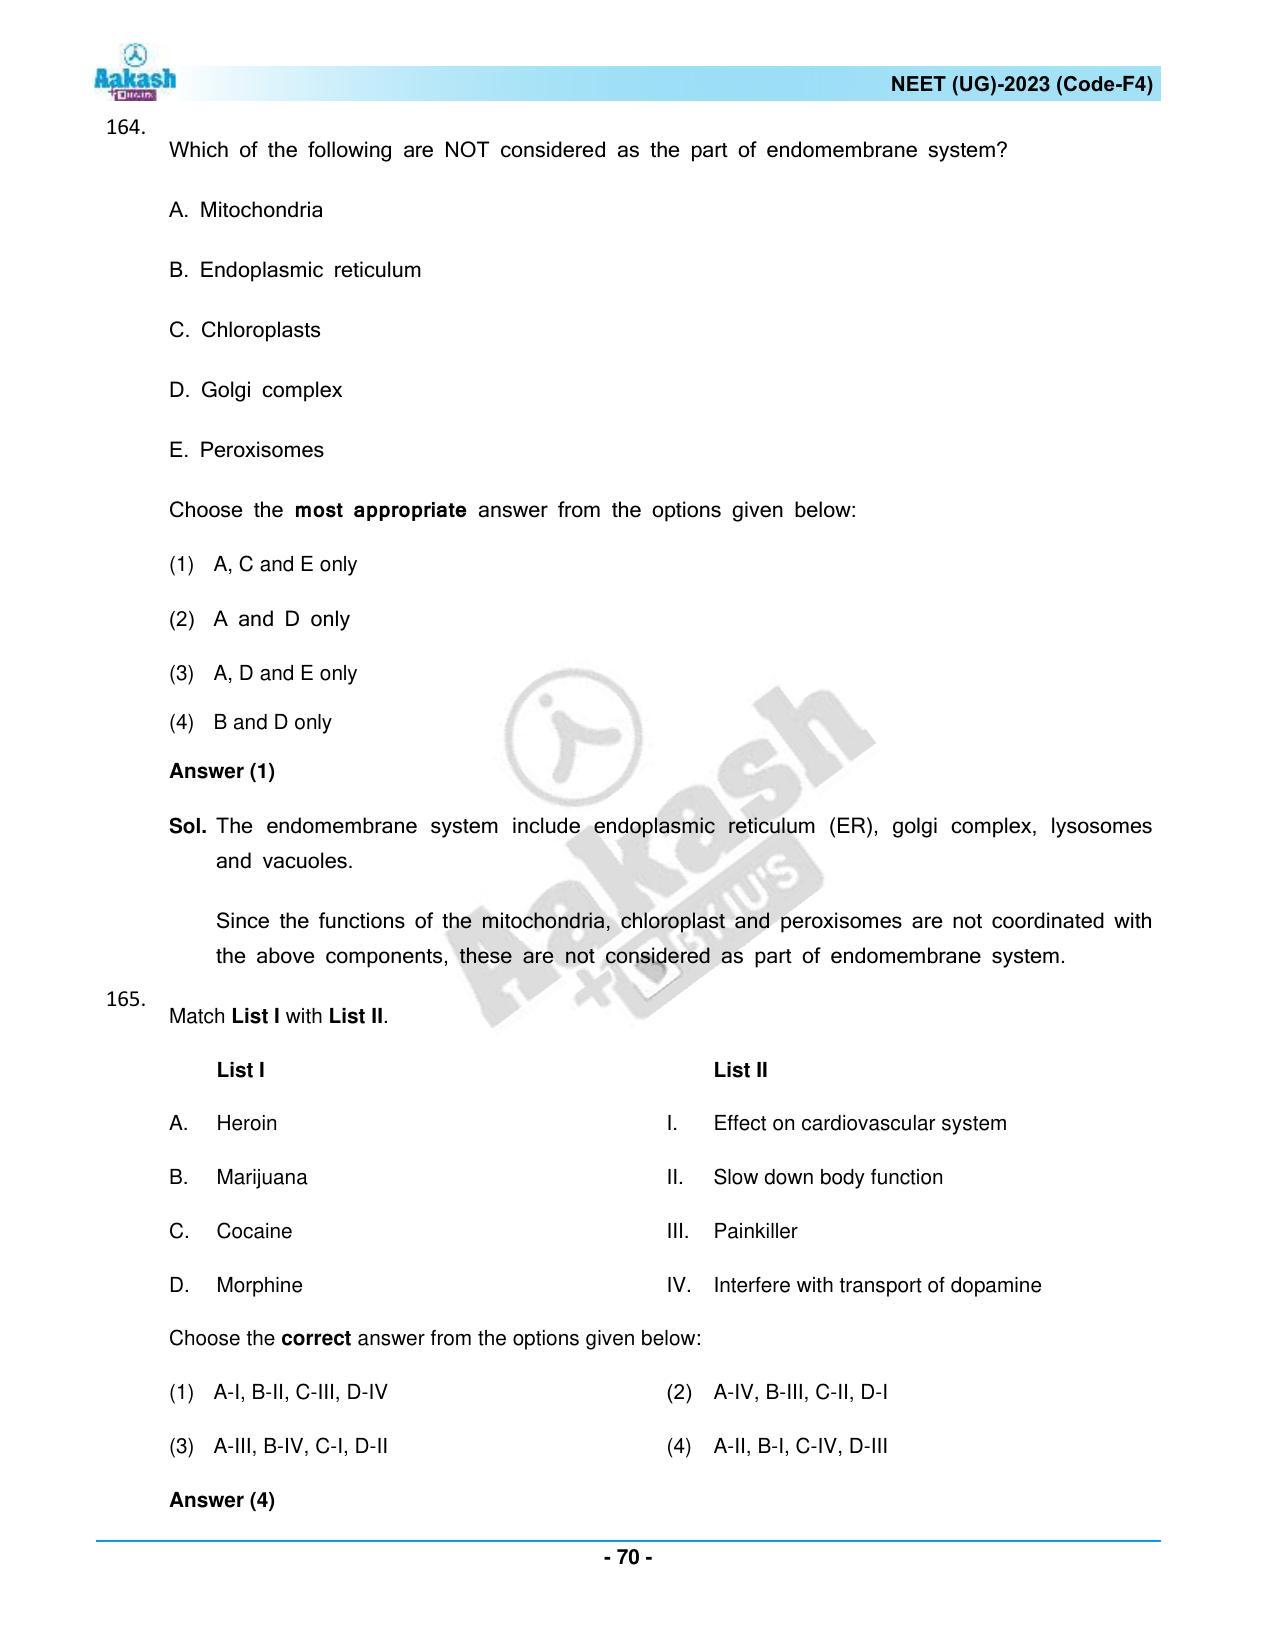 NEET 2023 Question Paper F4 - Page 70